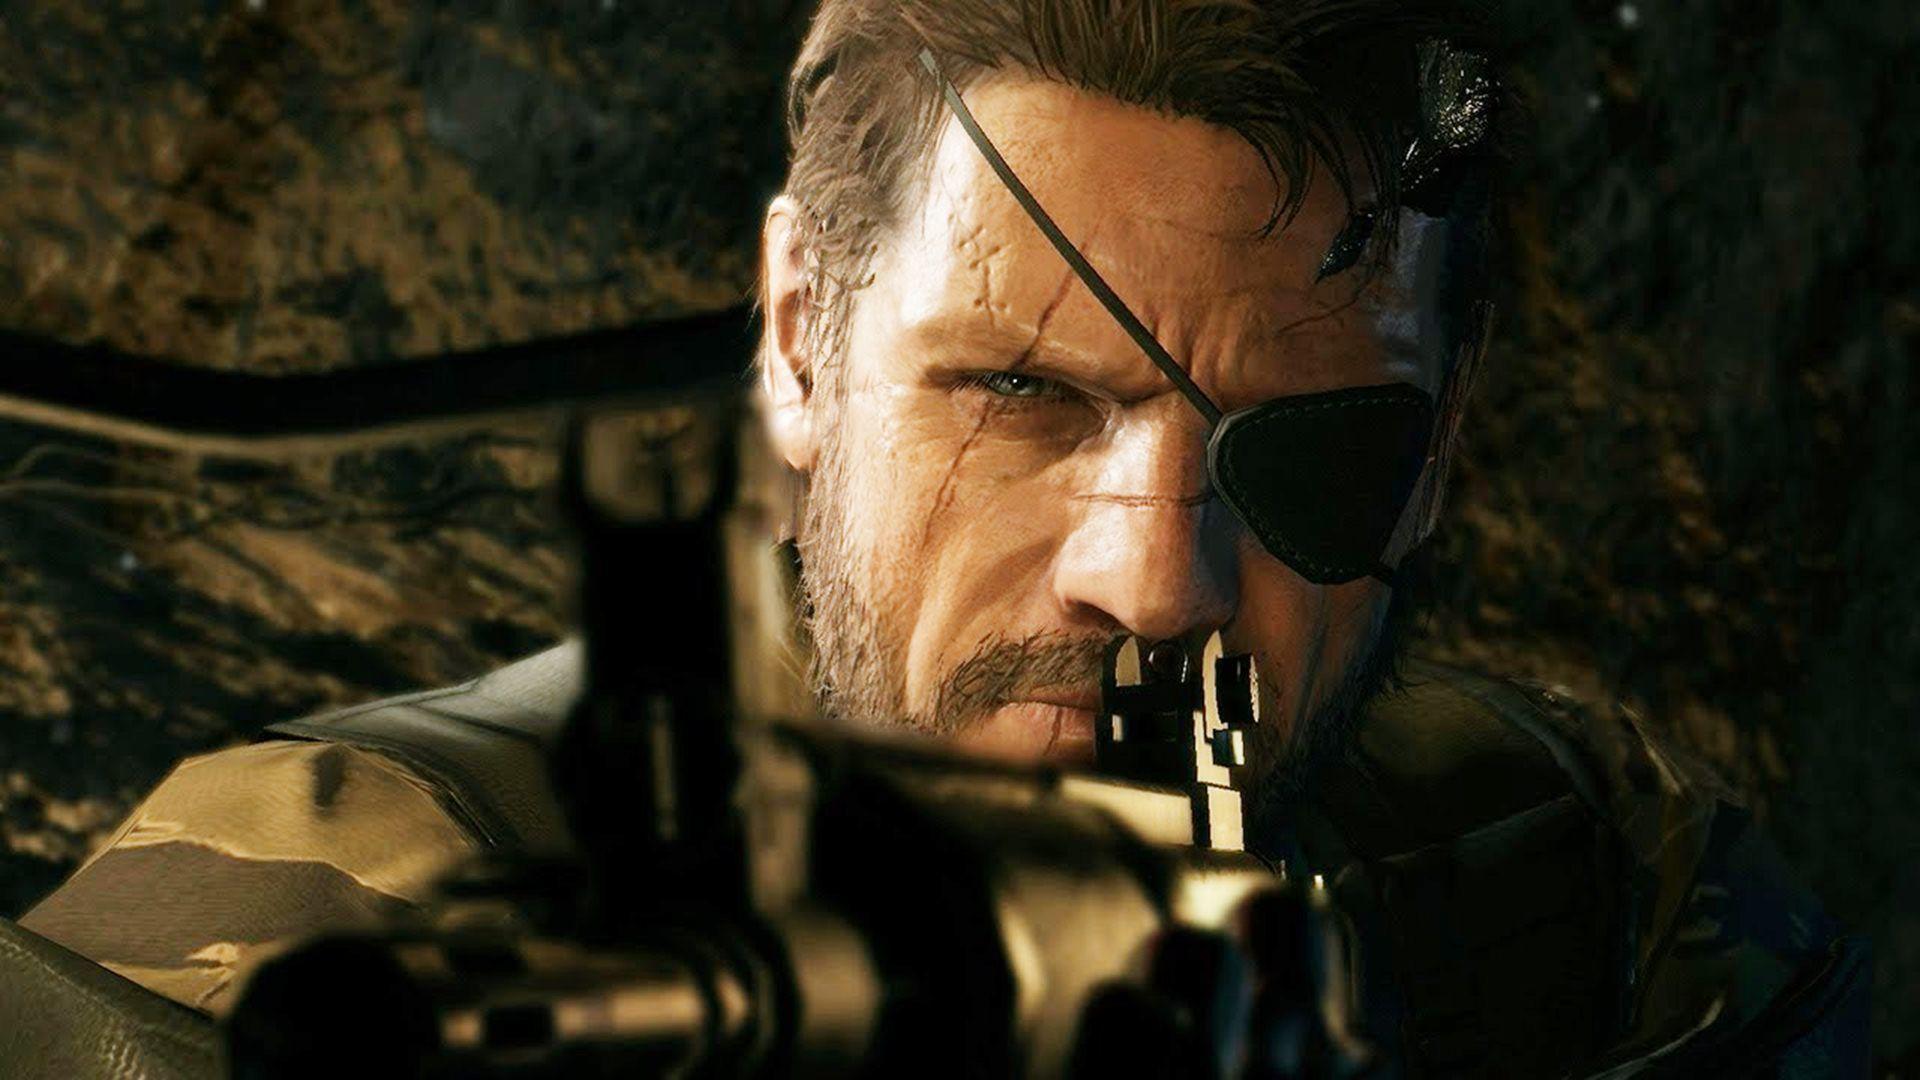 Metal Gear Solid 5: The Phantom Pain Wallpaper, Picture, Image